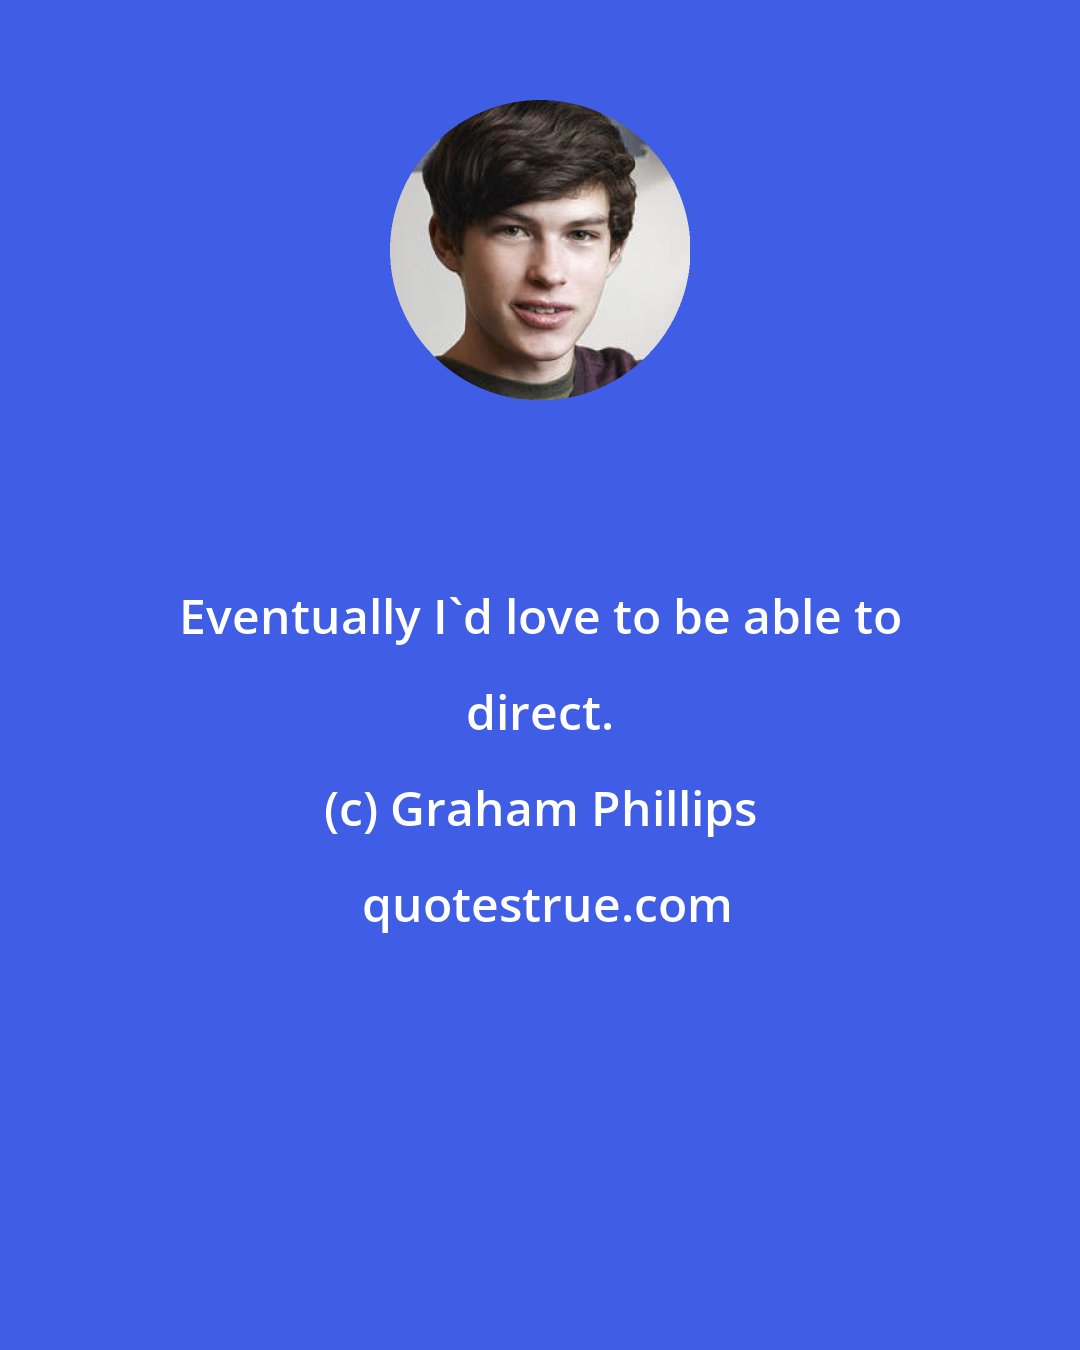 Graham Phillips: Eventually I'd love to be able to direct.